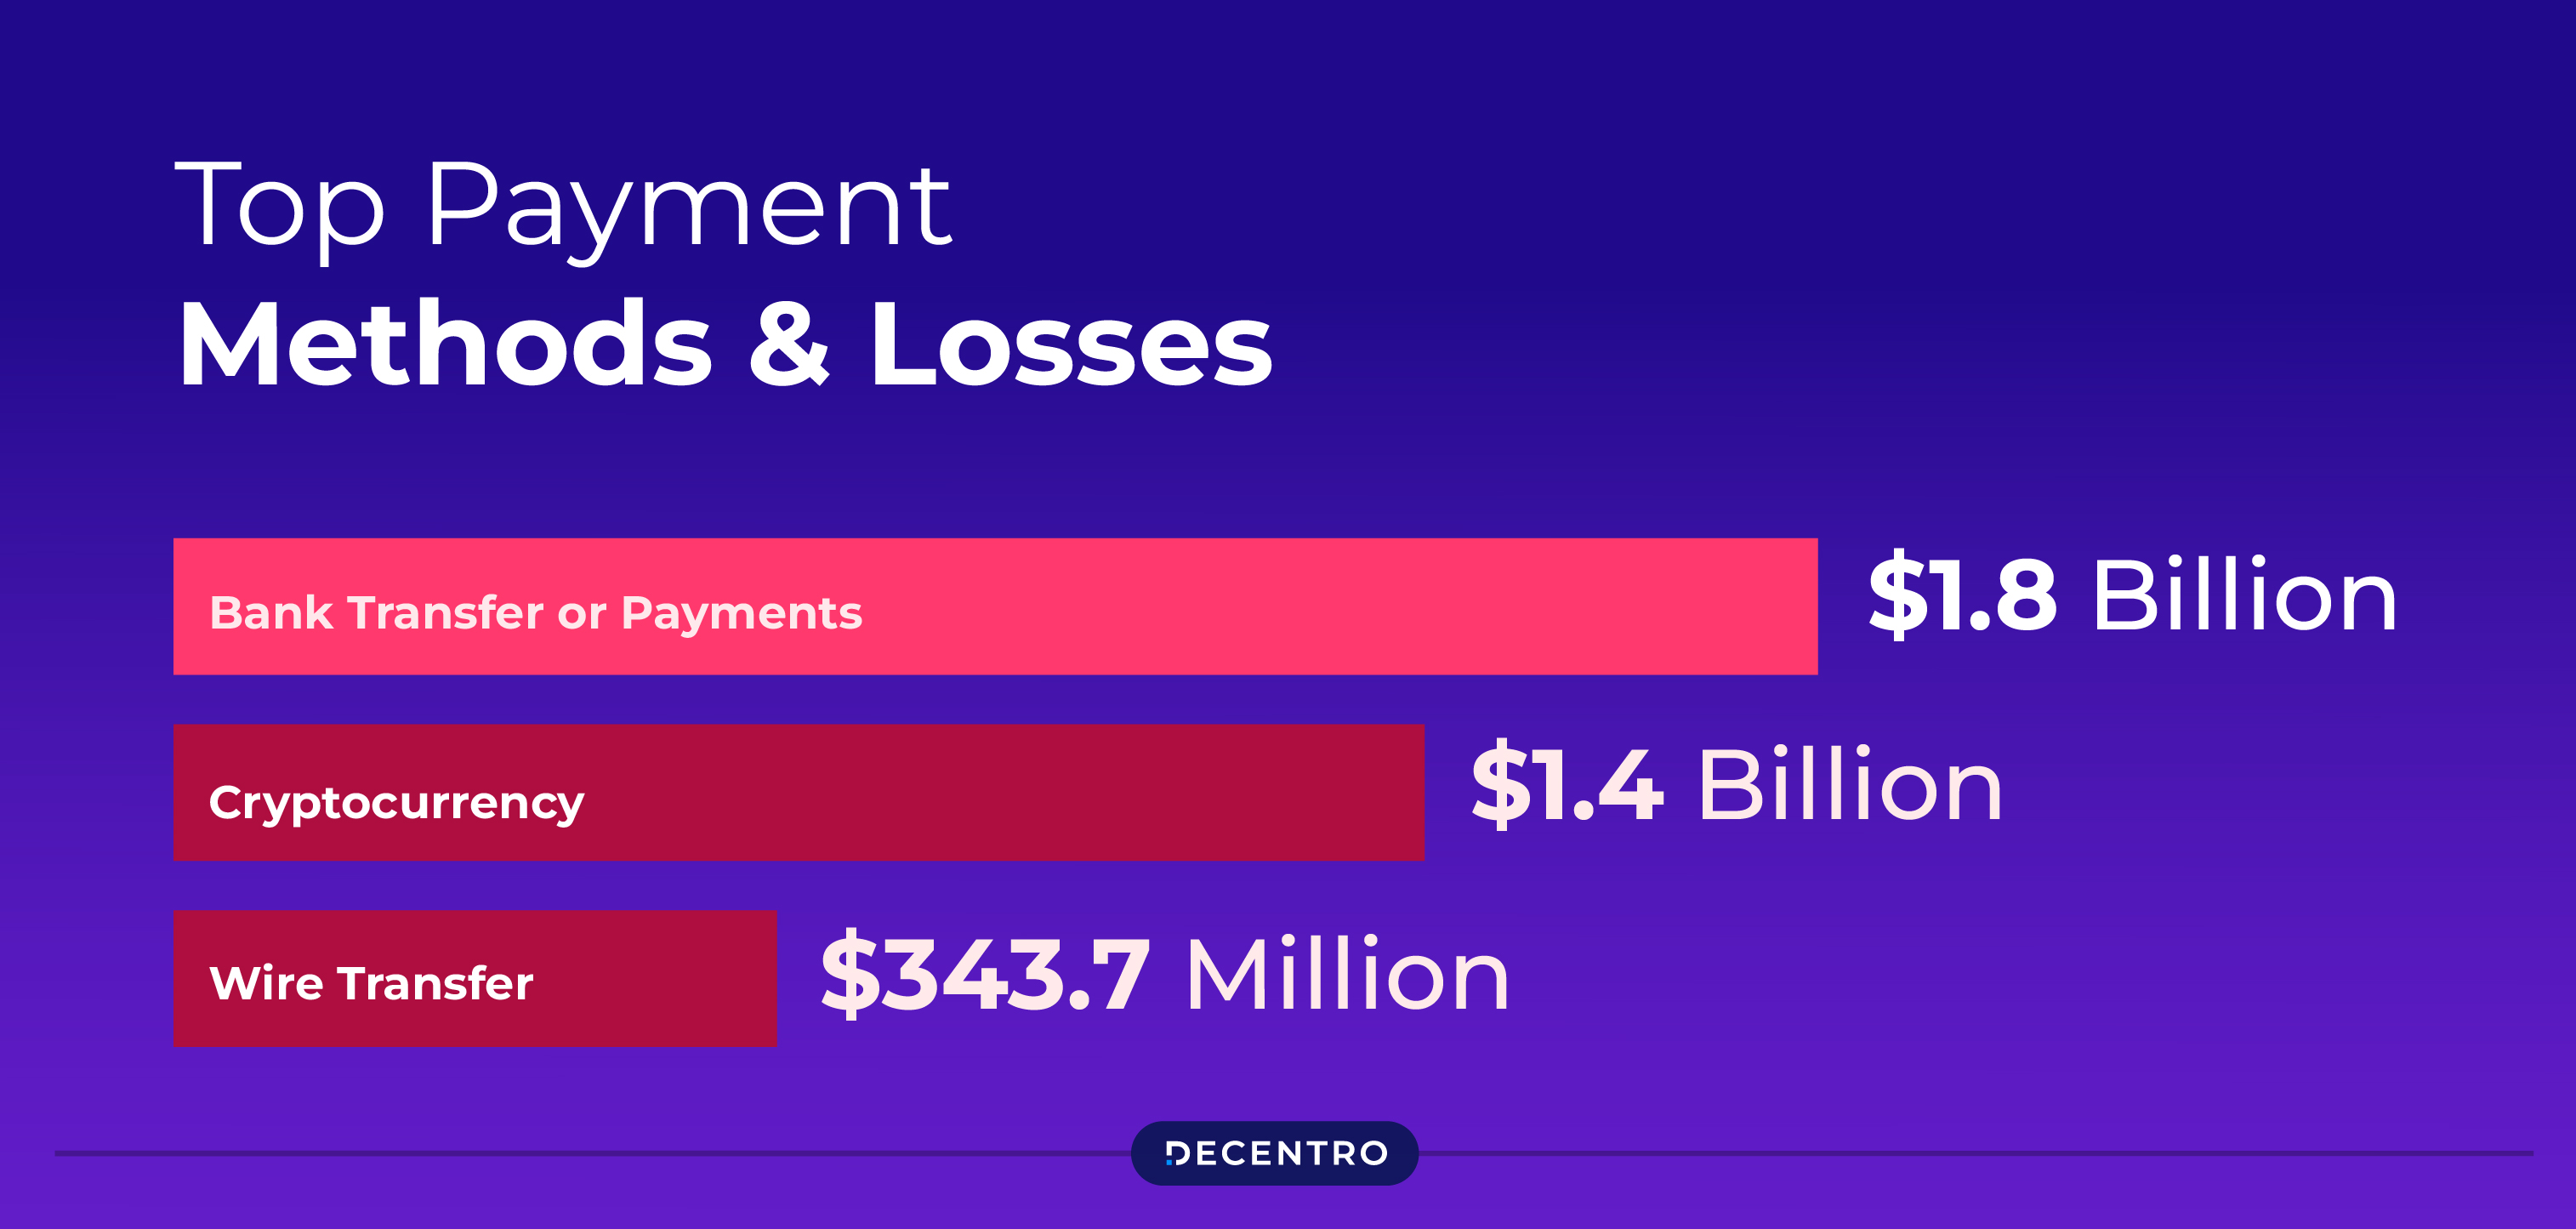 Statistics showing fraud losses due to payment methods